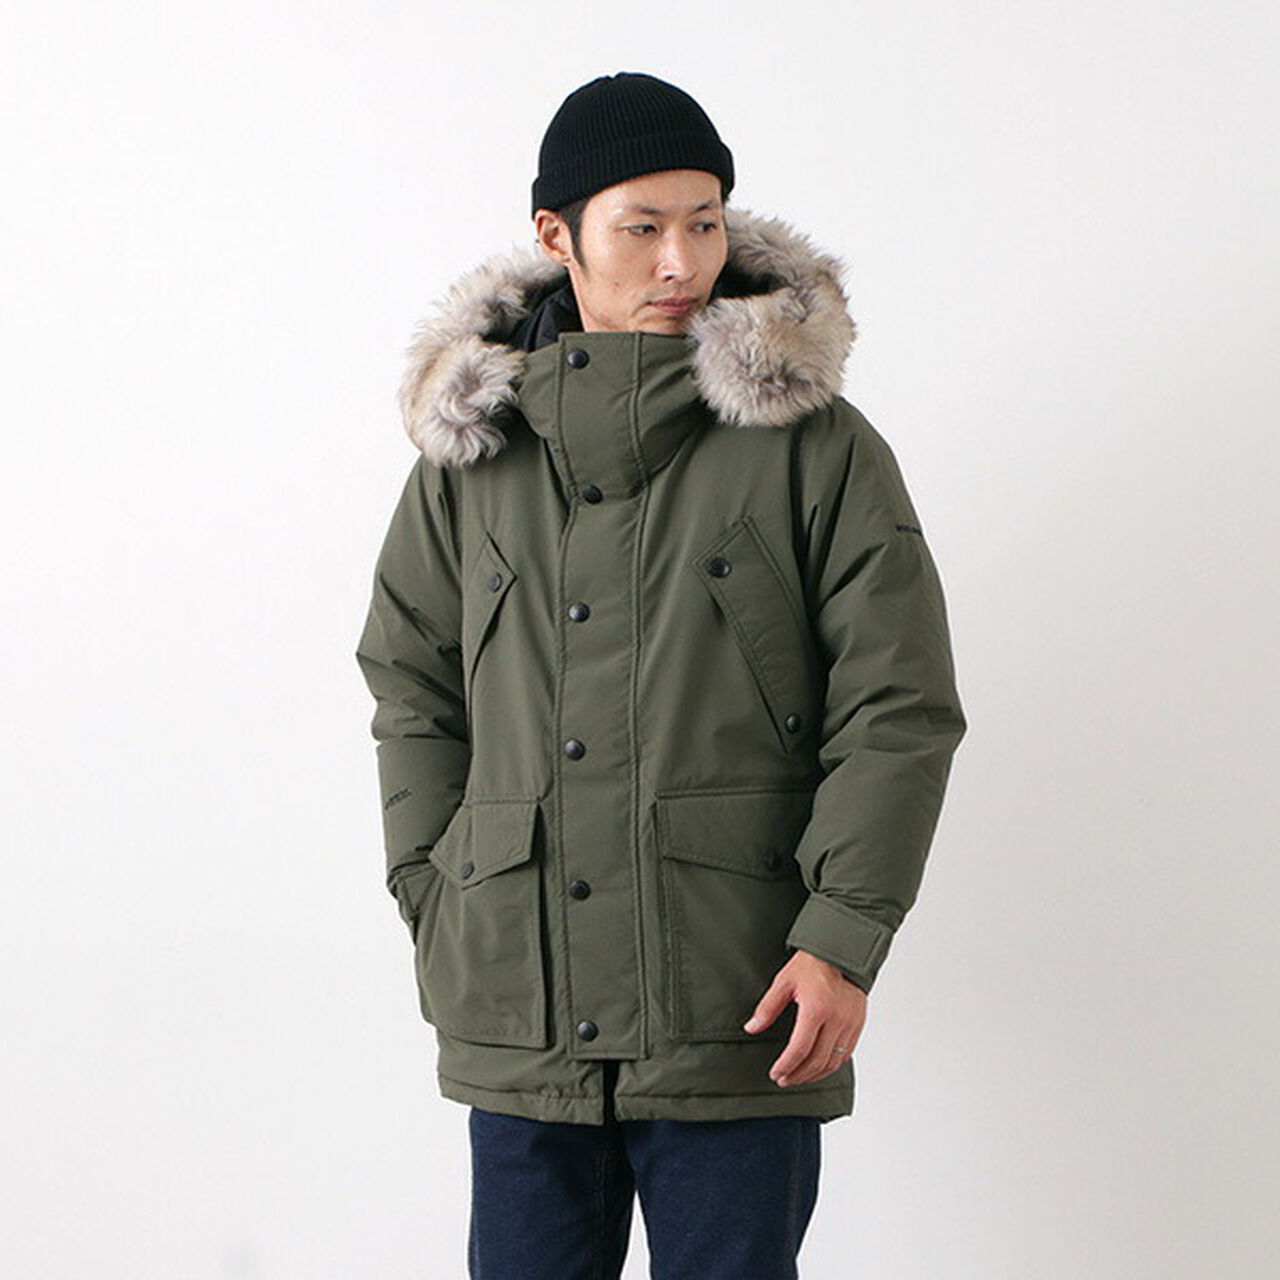 Gore-Tex ArcTec Down Parka,Taupe, large image number 0